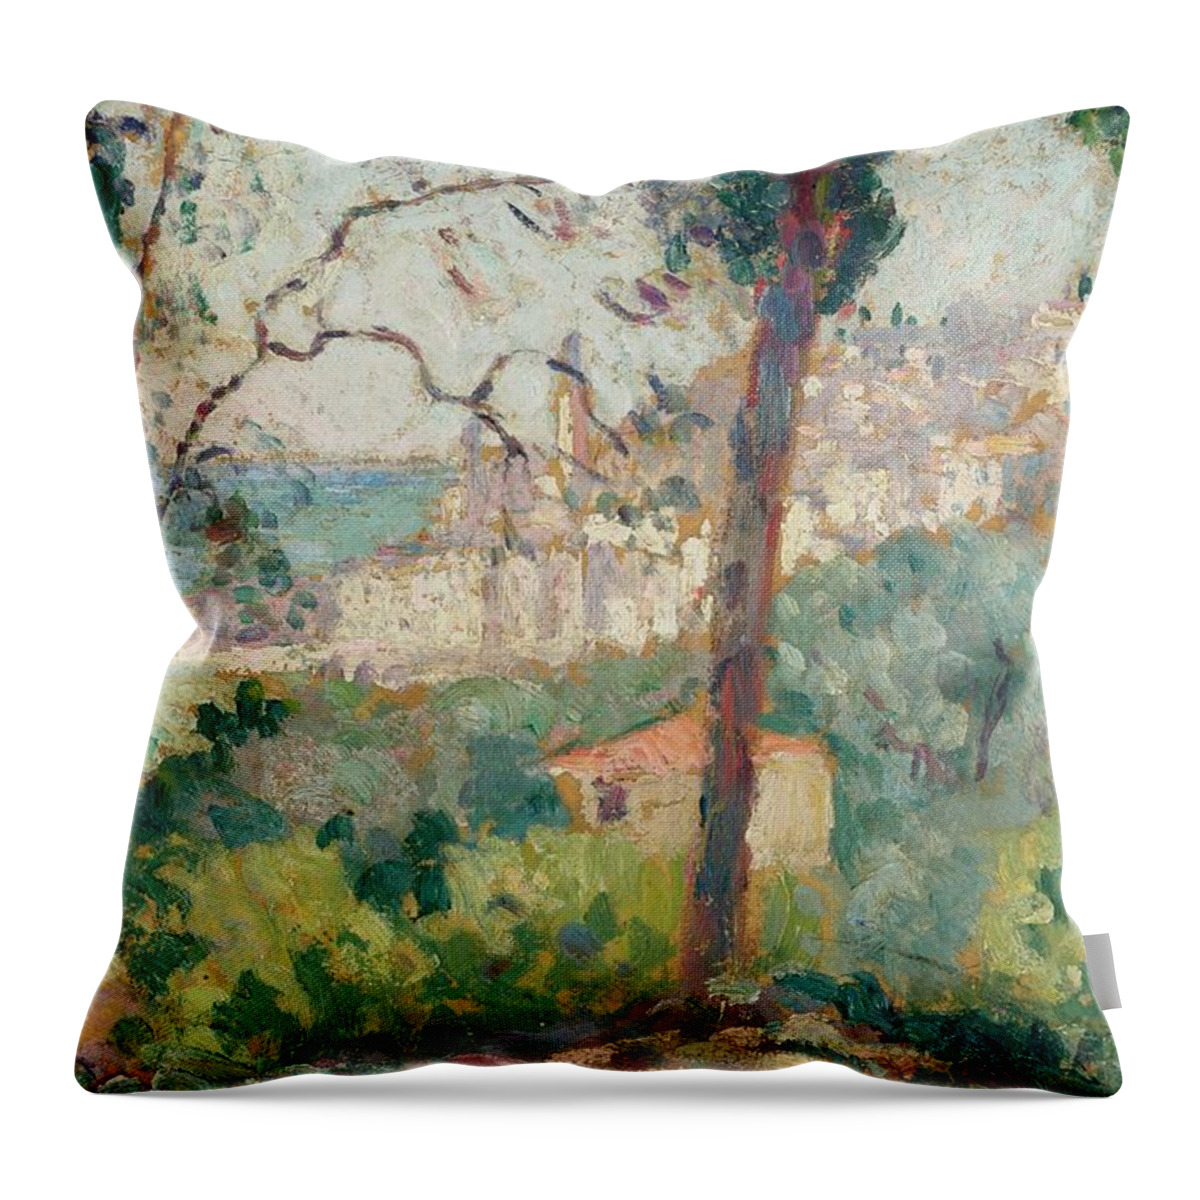 Background Throw Pillow featuring the painting Henri Lebasque by MotionAge Designs